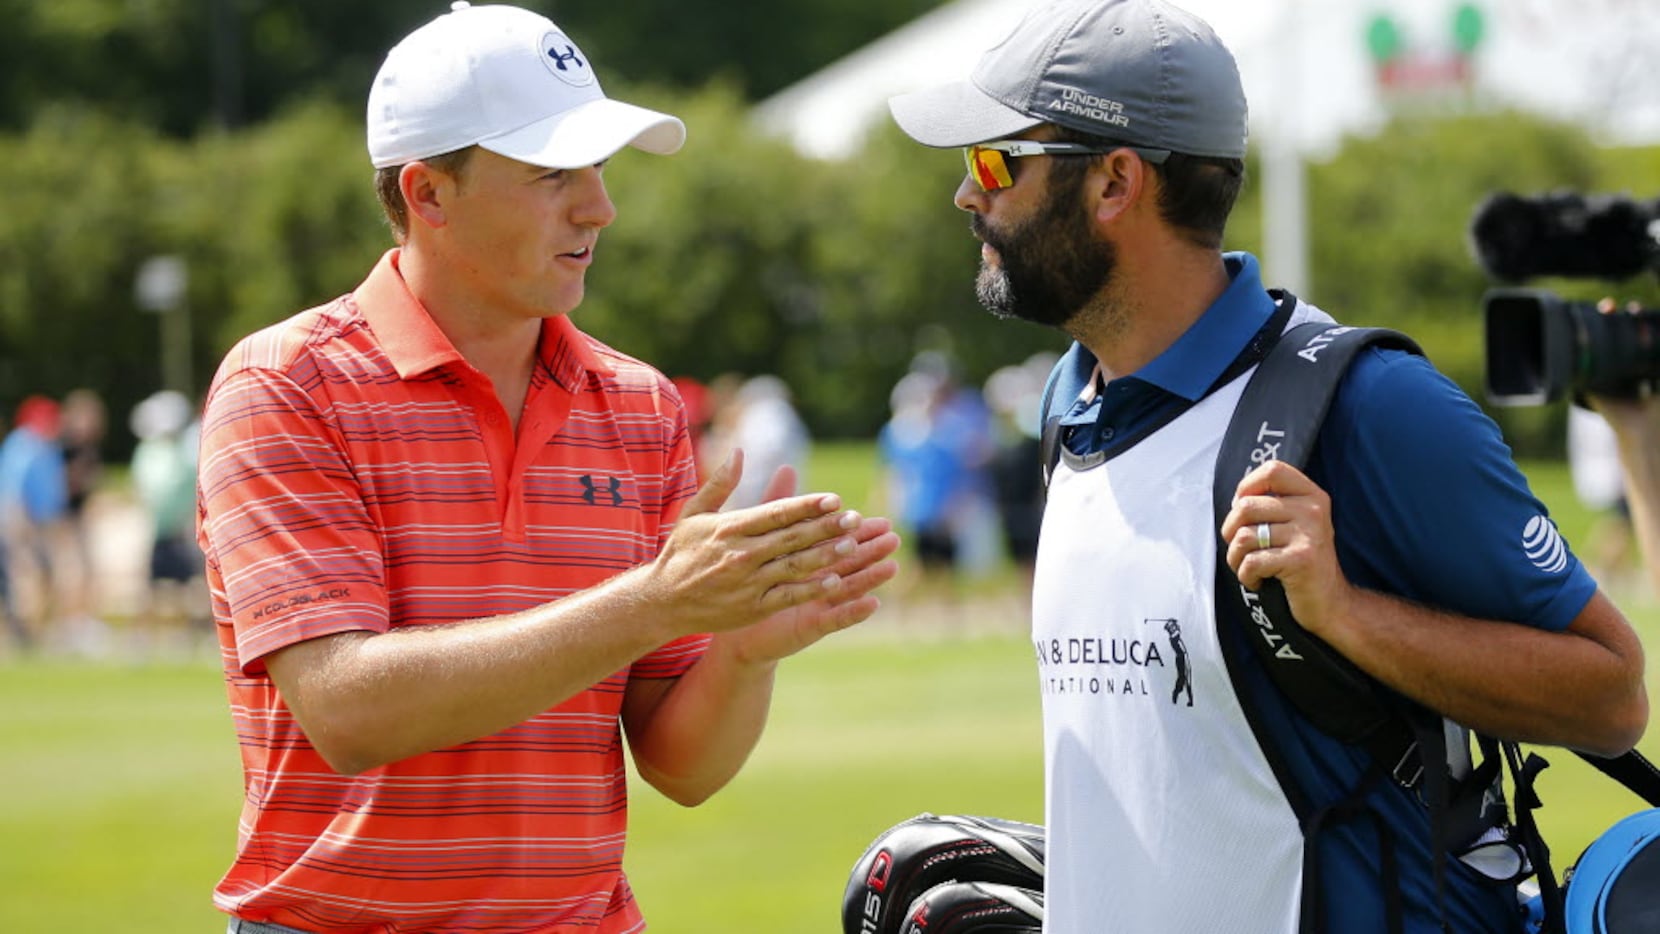 Golfer Jordan Spieth (left) converses with his caddie Michael Greller following his first...